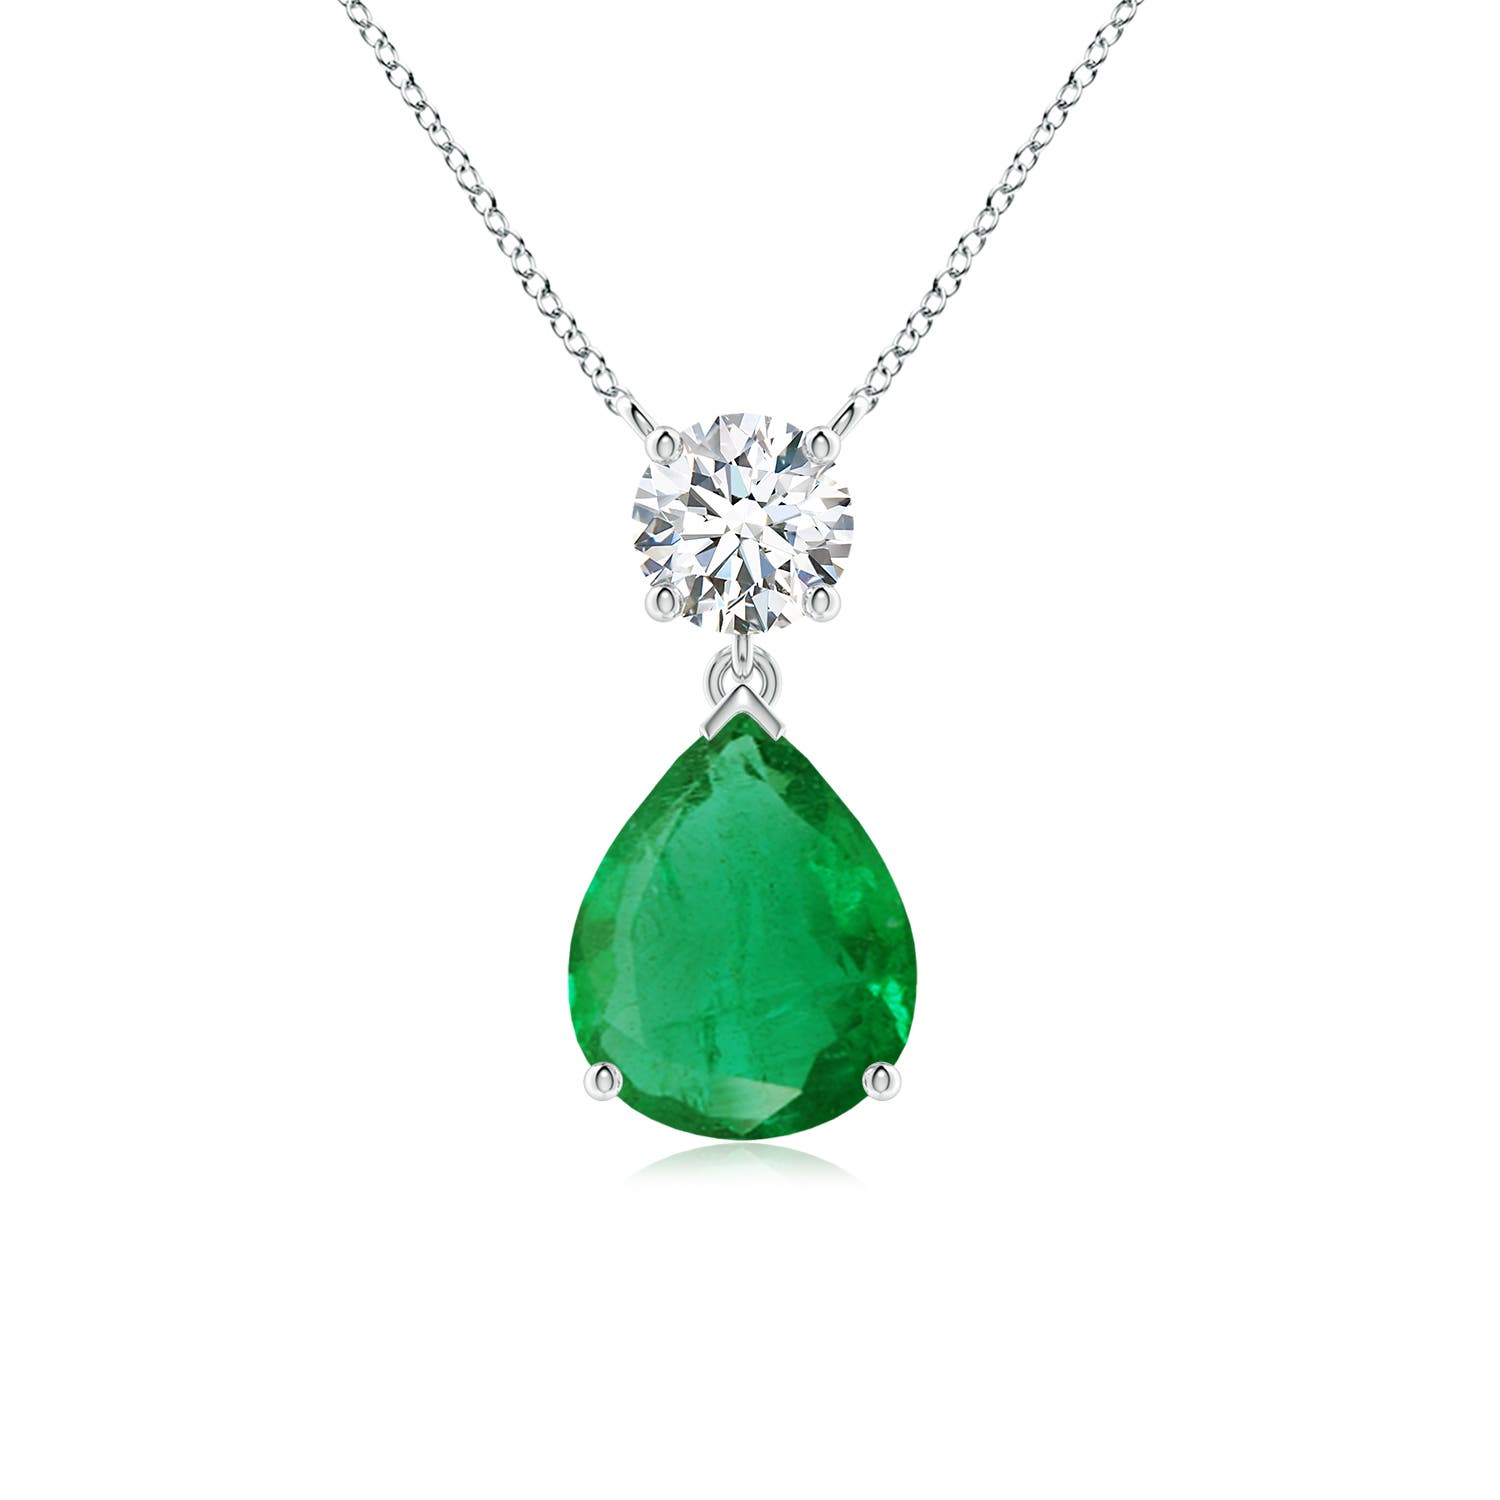 AA - Emerald / 3 CT / 14 KT White Gold